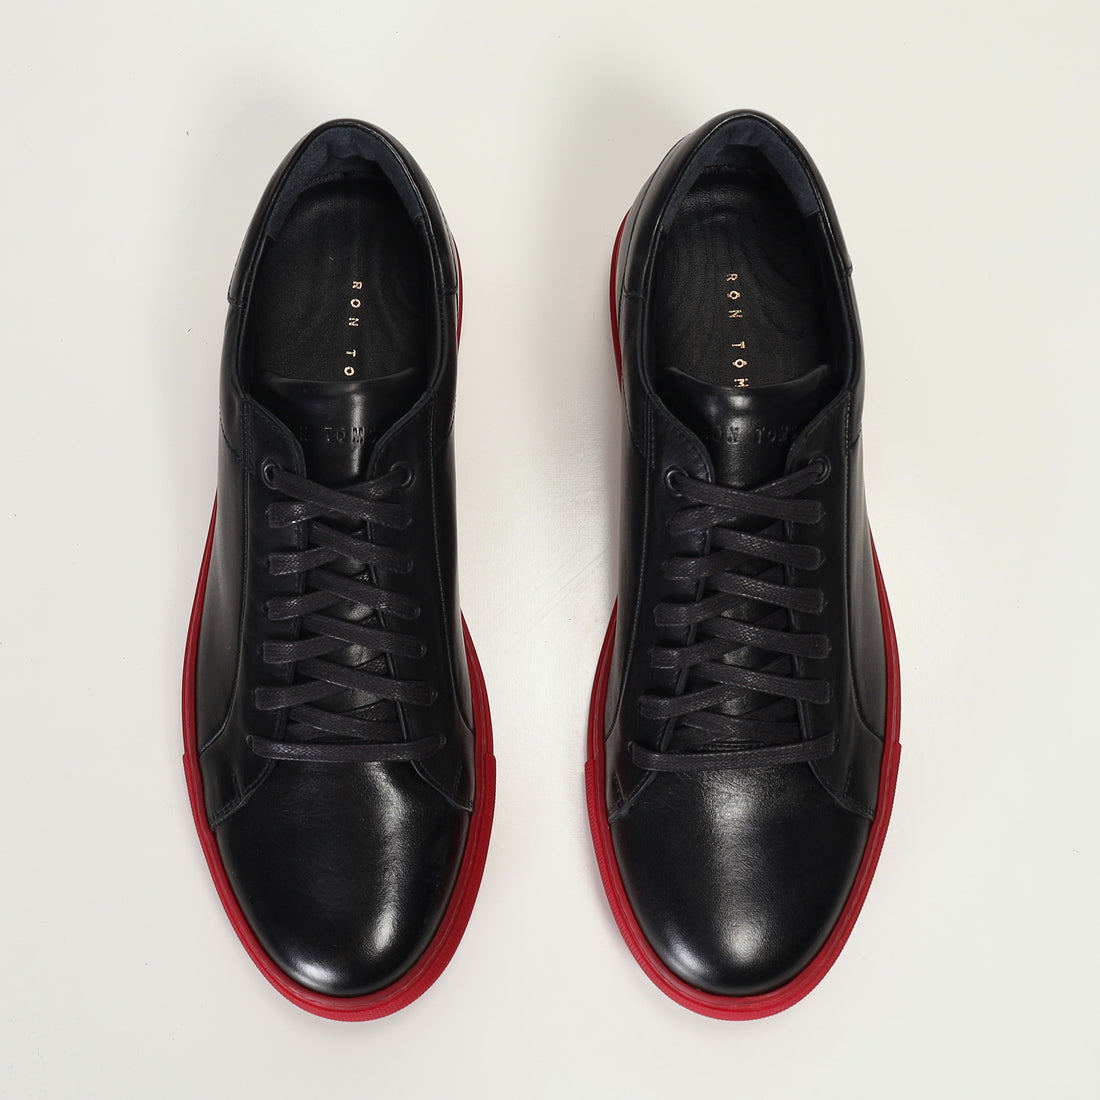 Genuine Leather Court Sneakers - Black Red